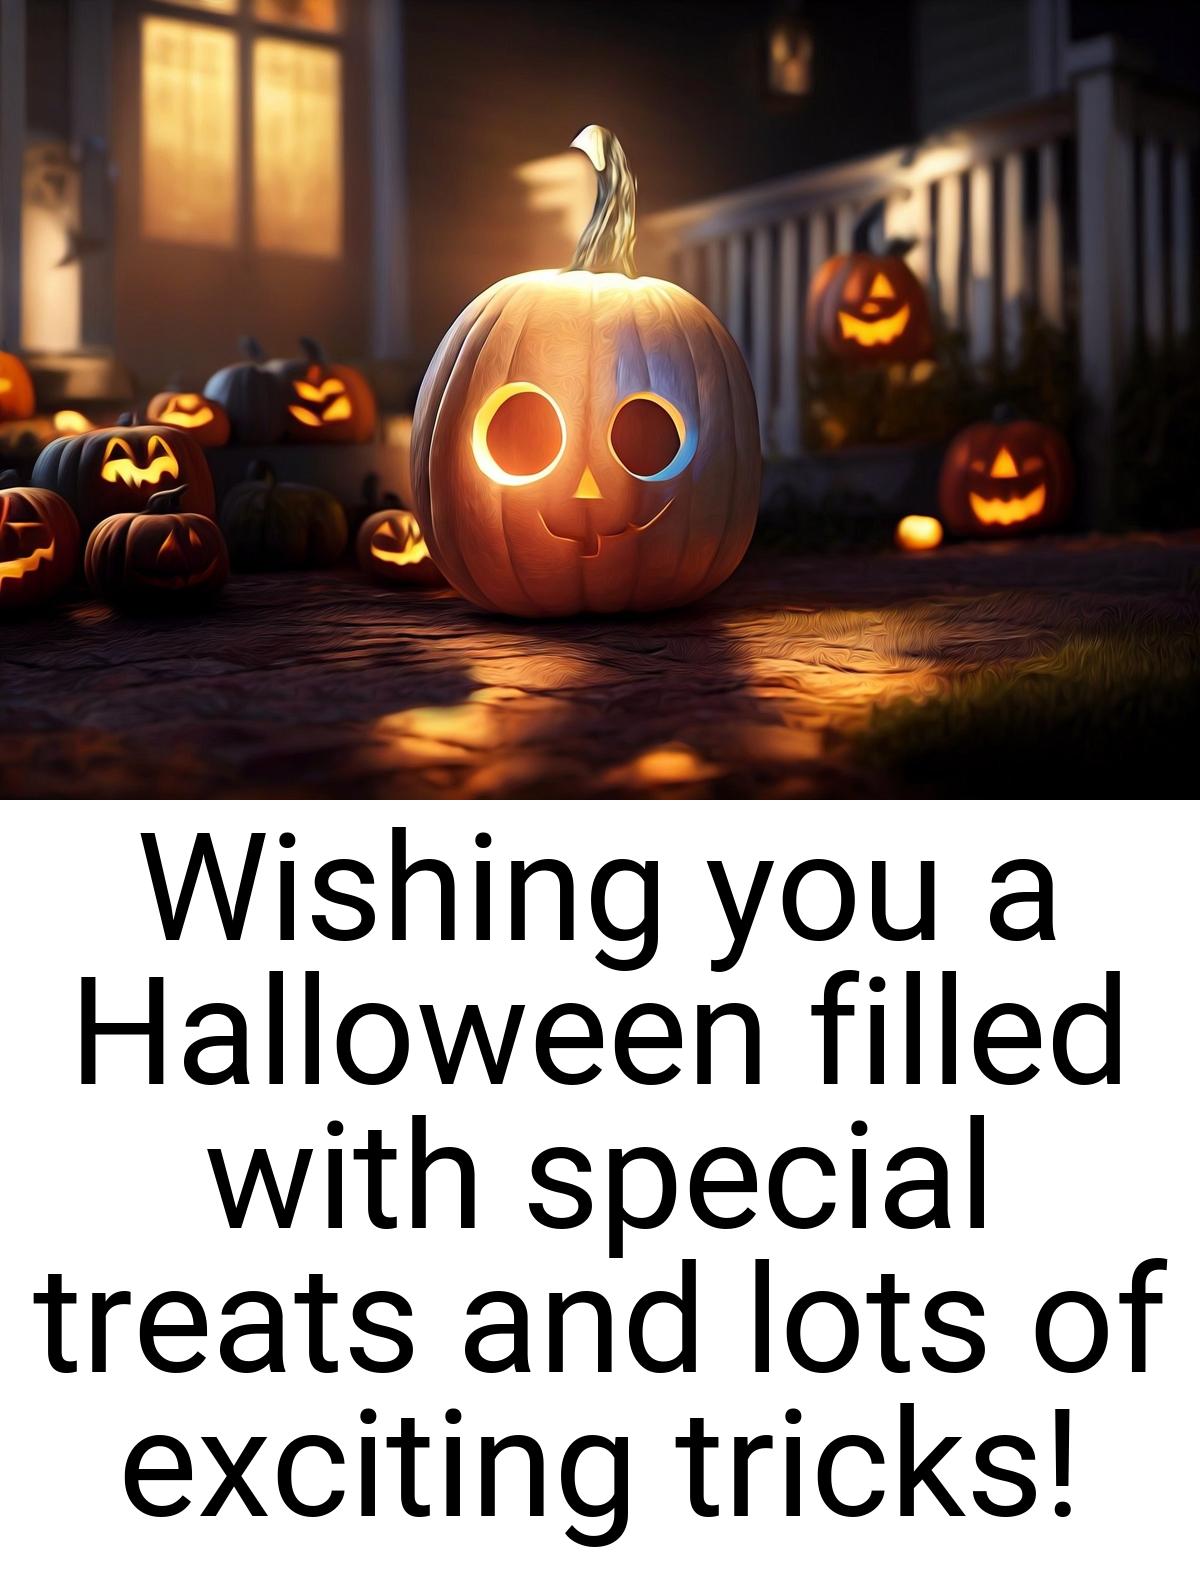 Wishing you a Halloween filled with special treats and lots